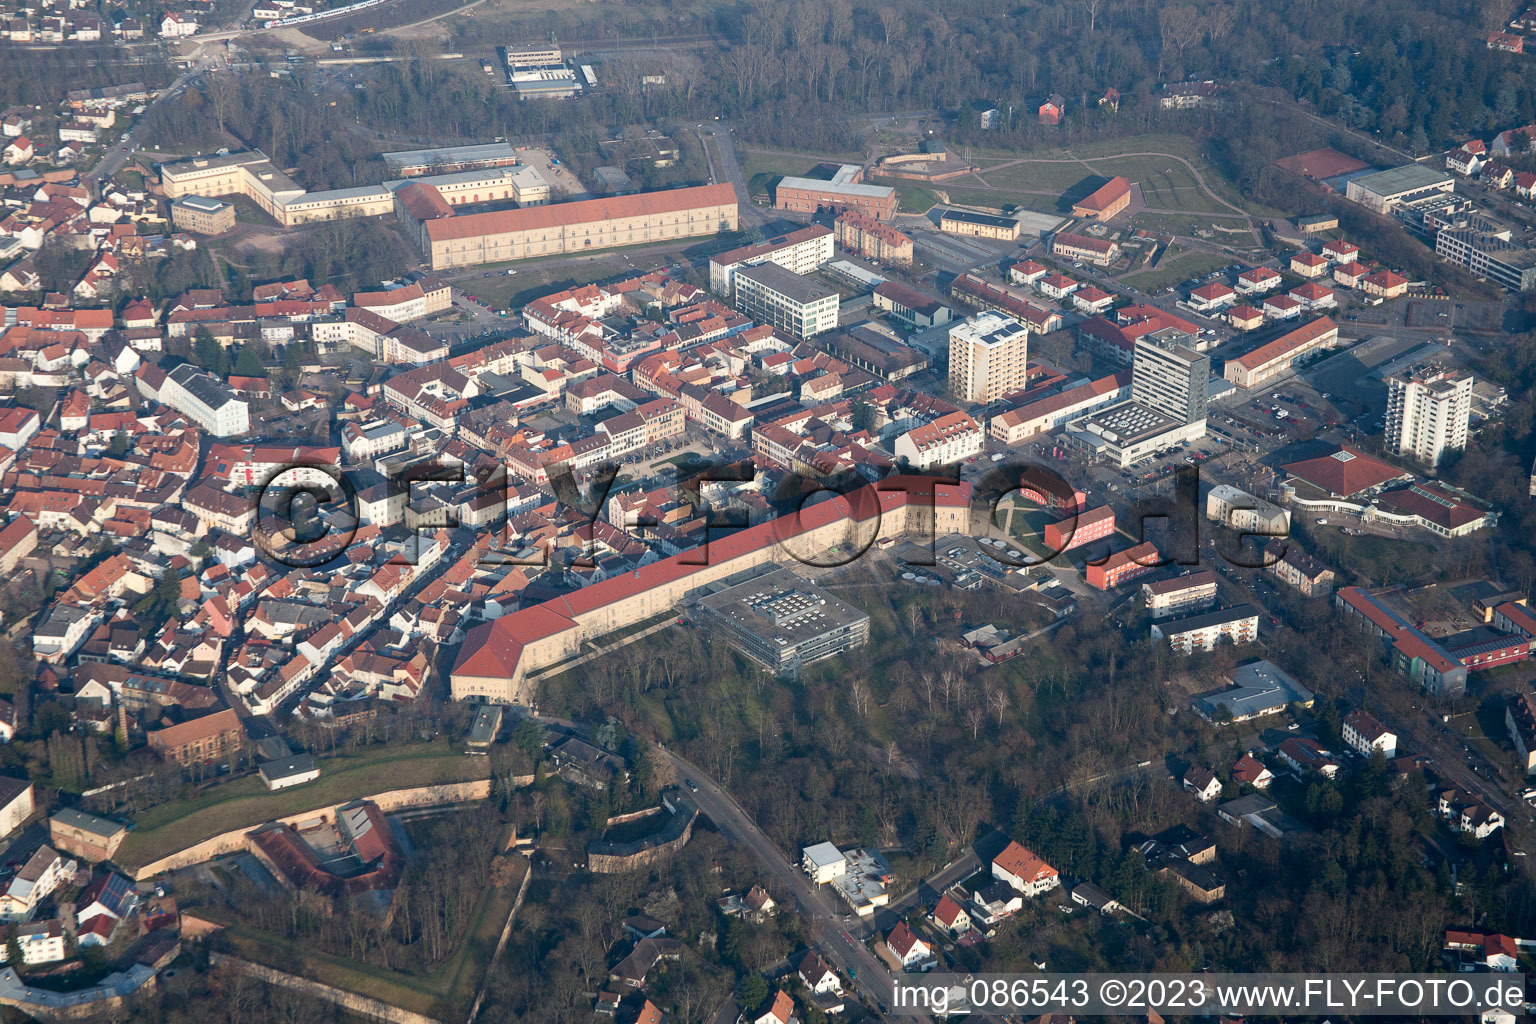 Germersheim in the state Rhineland-Palatinate, Germany seen from above